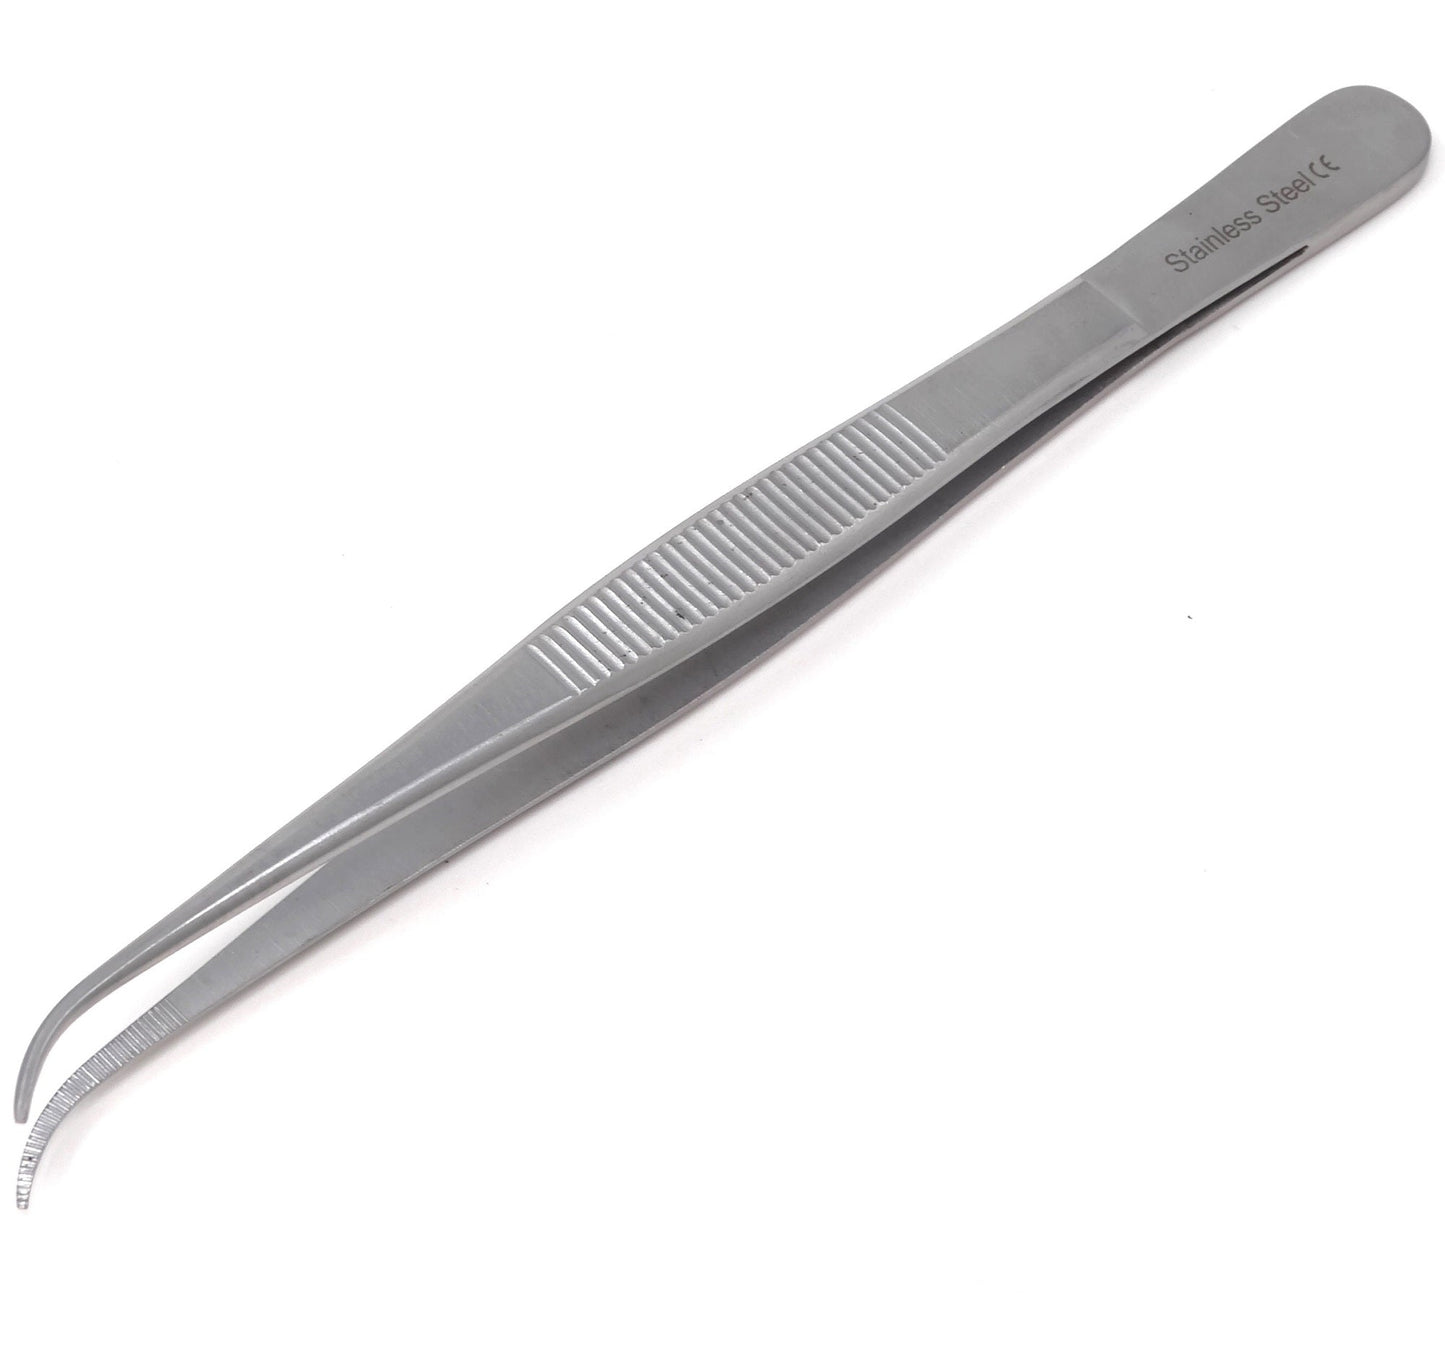 Dissecting Forceps Stainless Steel Micro Fine Point Serrated Tips 5.5" Curved Tweezers